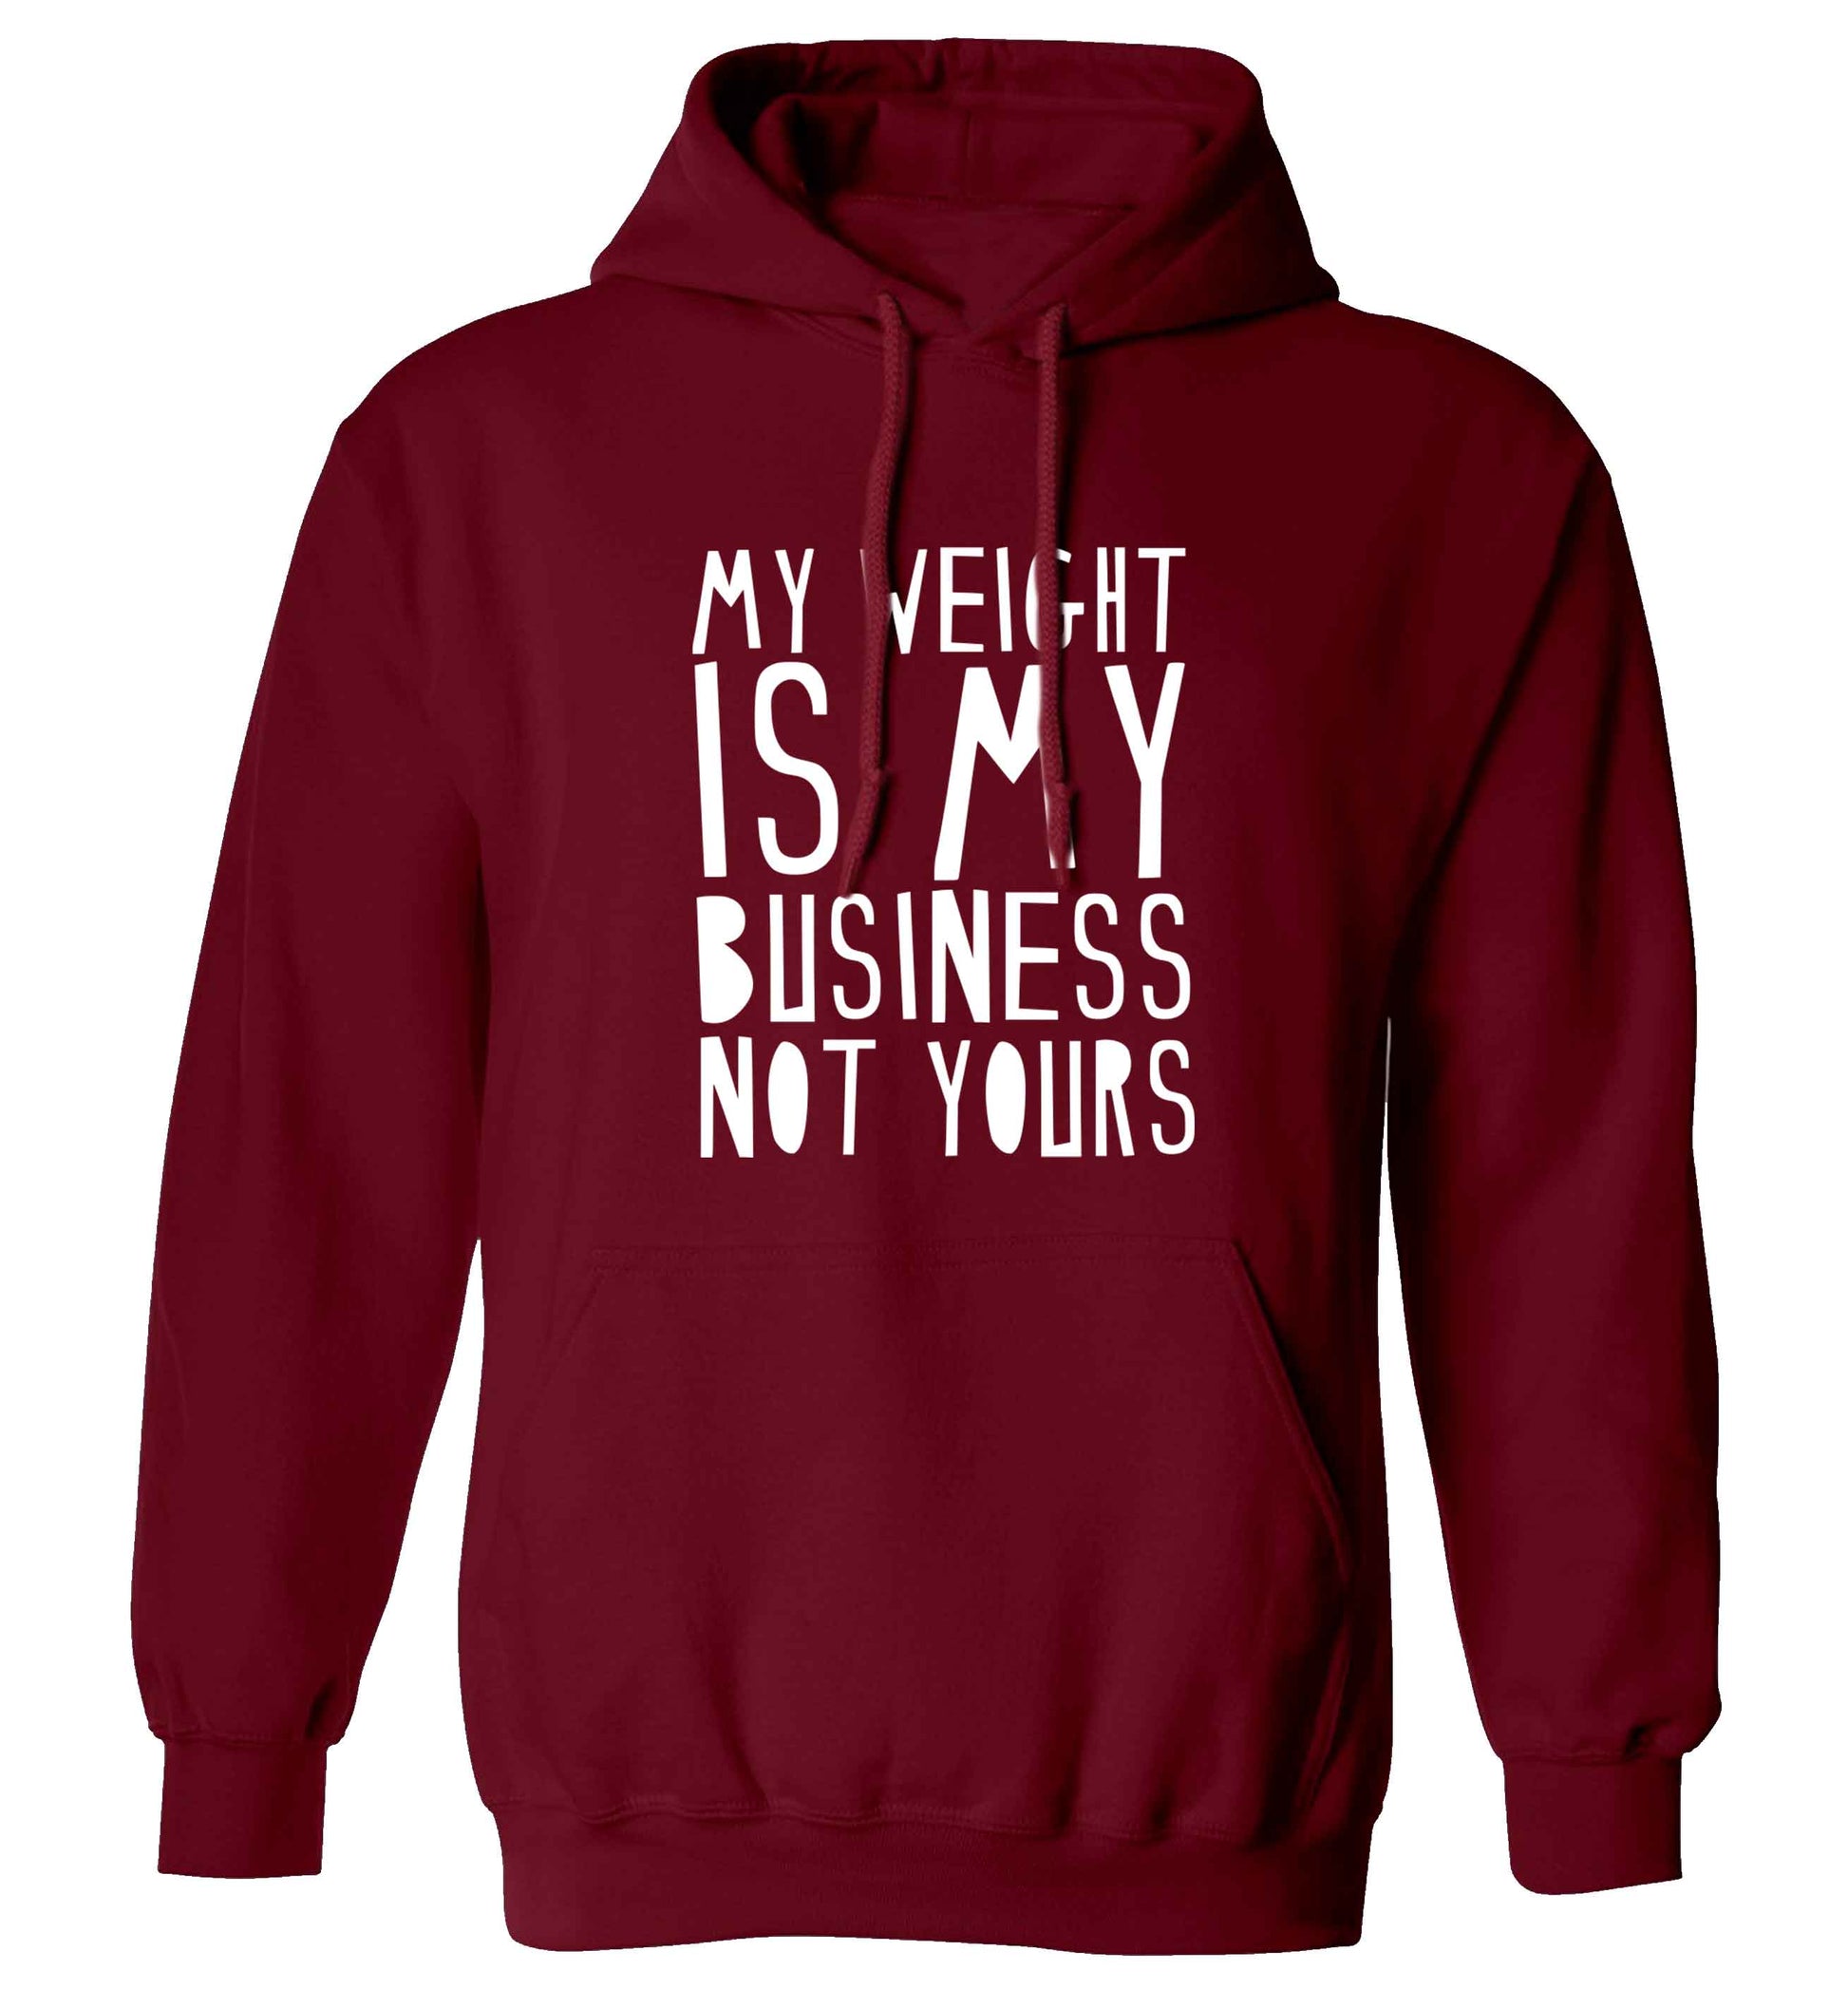 My weight is my business not yours adults unisex maroon hoodie 2XL